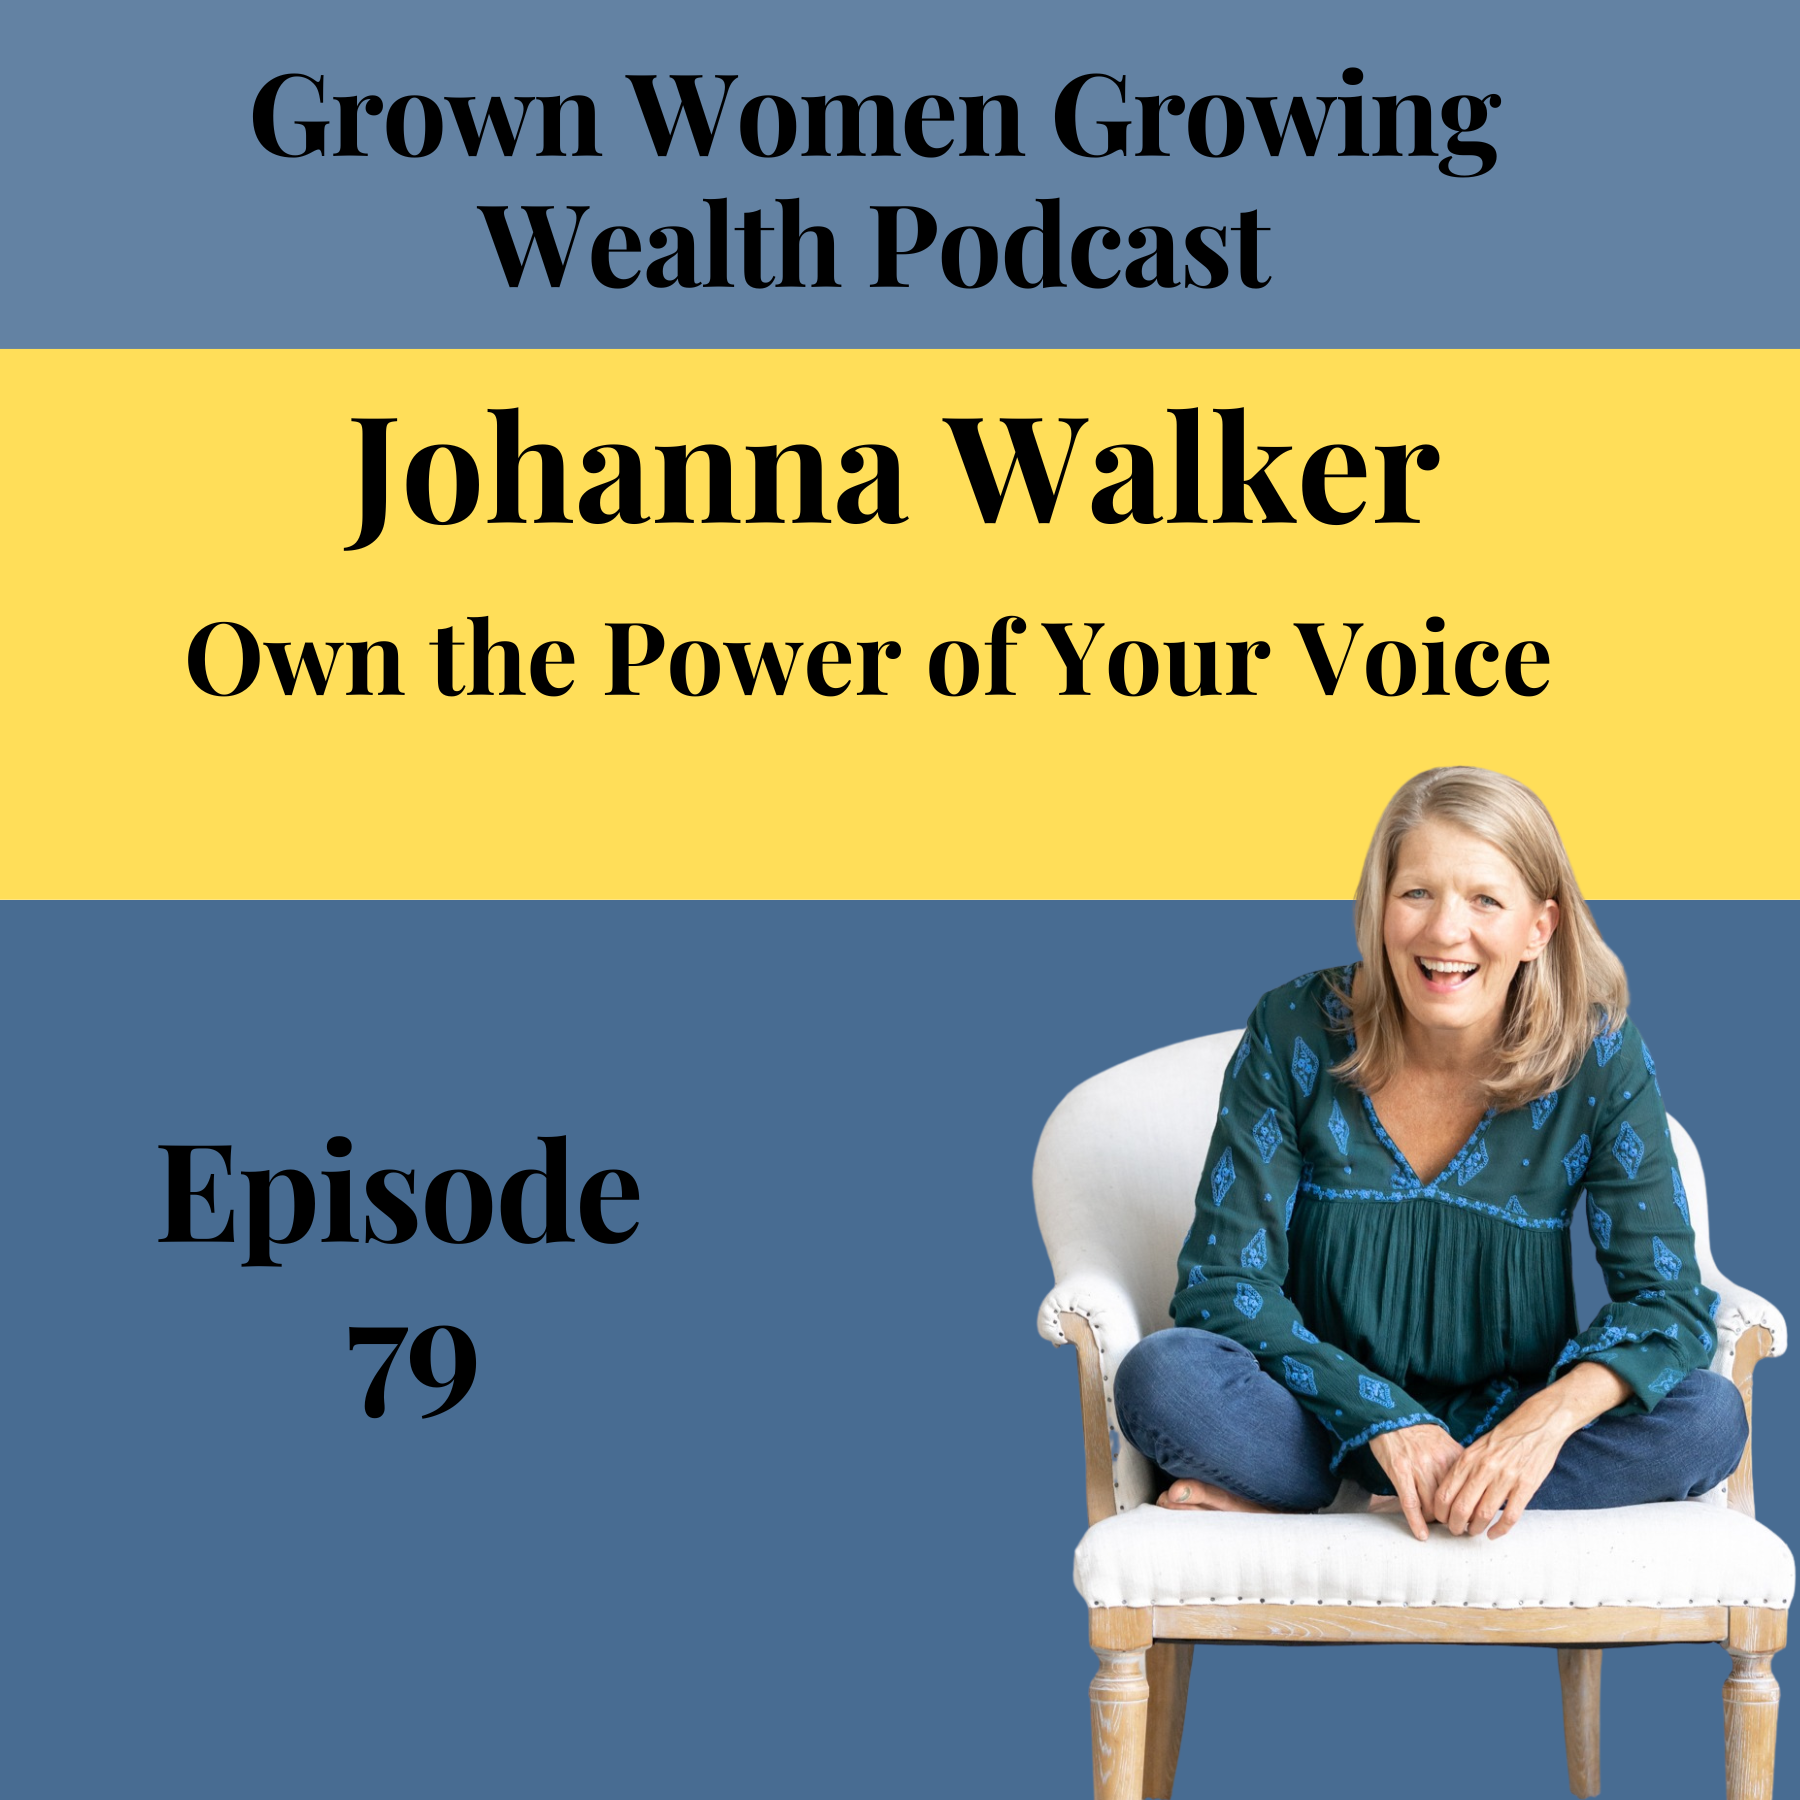 Ep 79 Own the Power of Your Voice w Johanna Walker